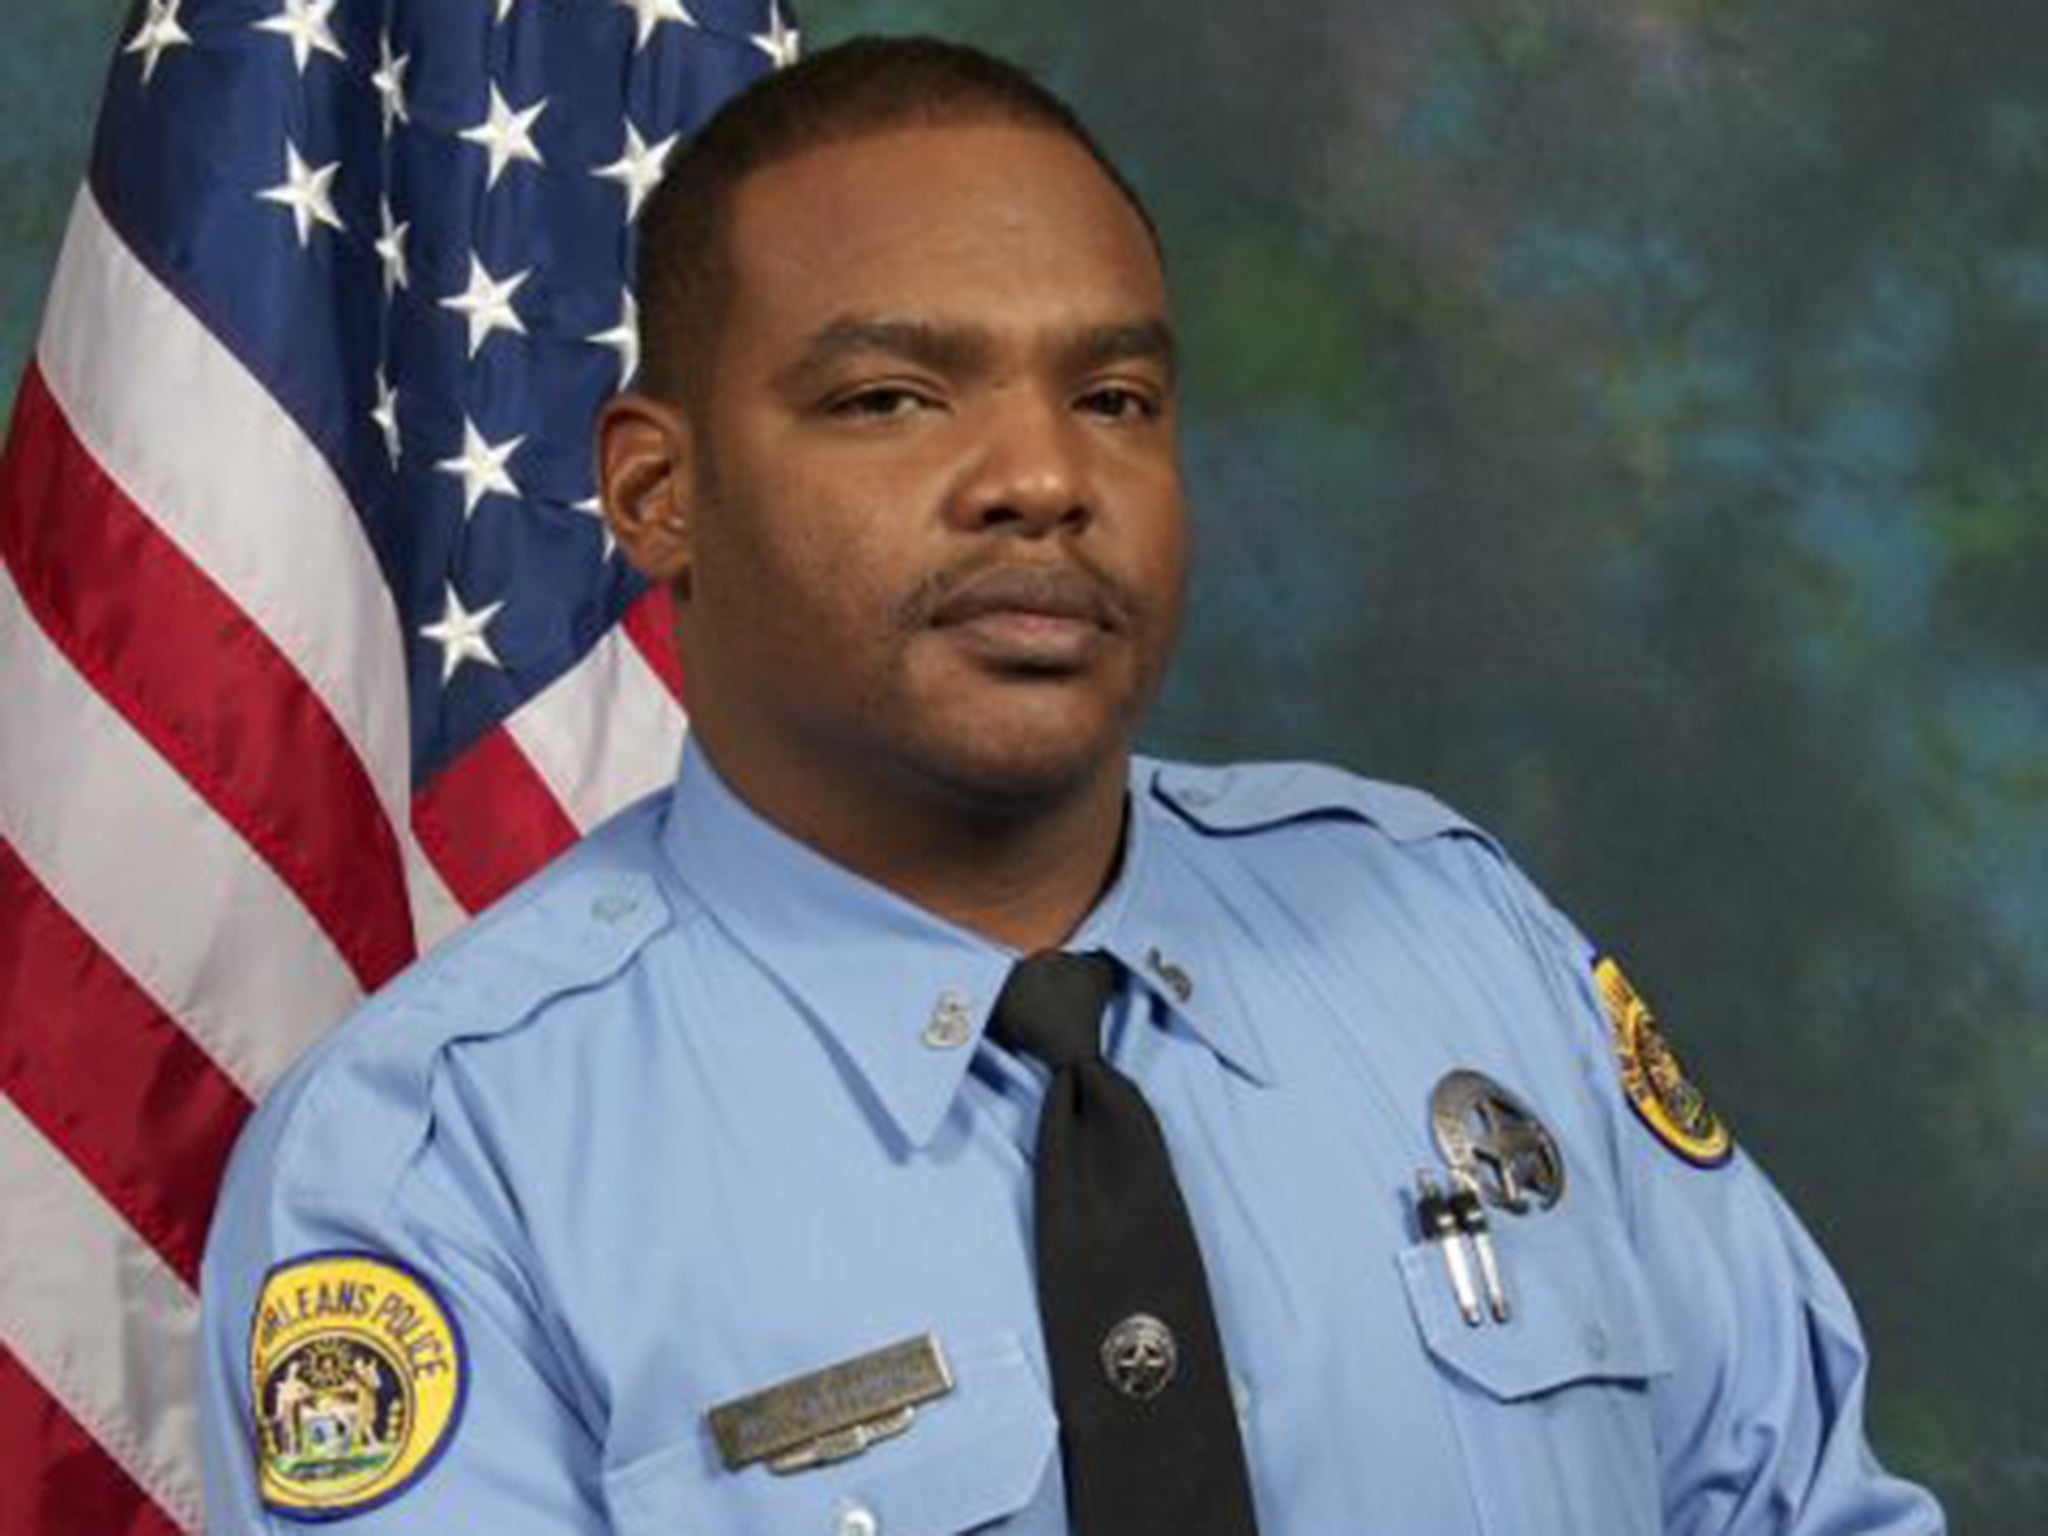 The New Orleans Police Department said Officer Daryle Holloway was shot while transporting a suspect